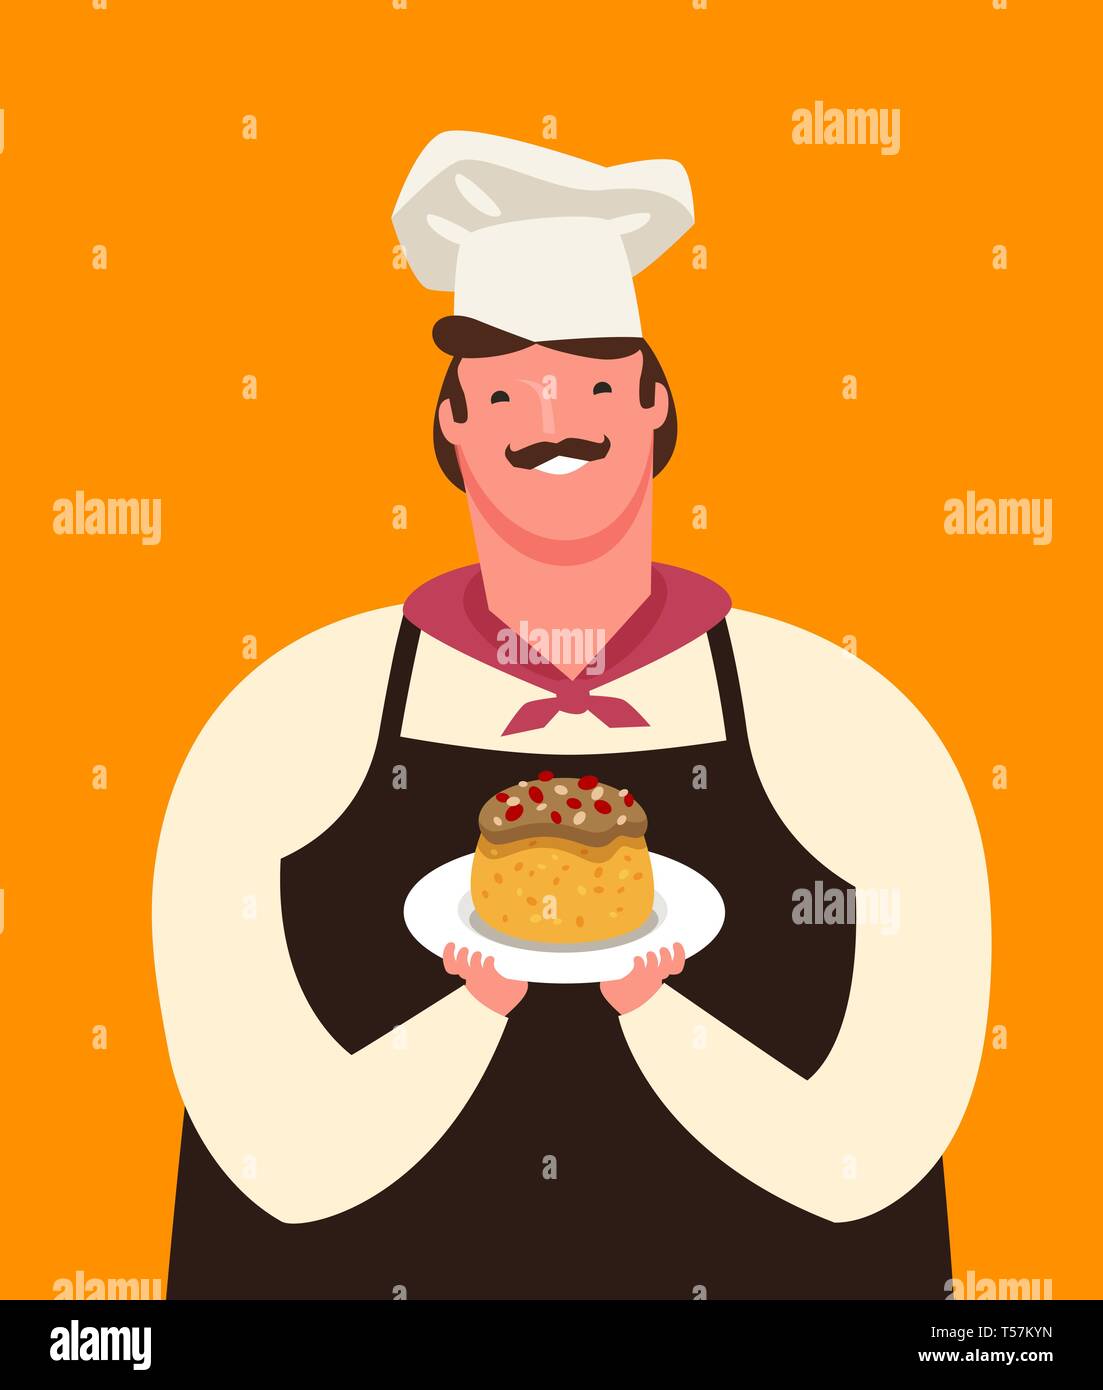 Cute chef holding a plate of dessert. Menu, culinary concept. Cartoon vector illustration Stock Vector